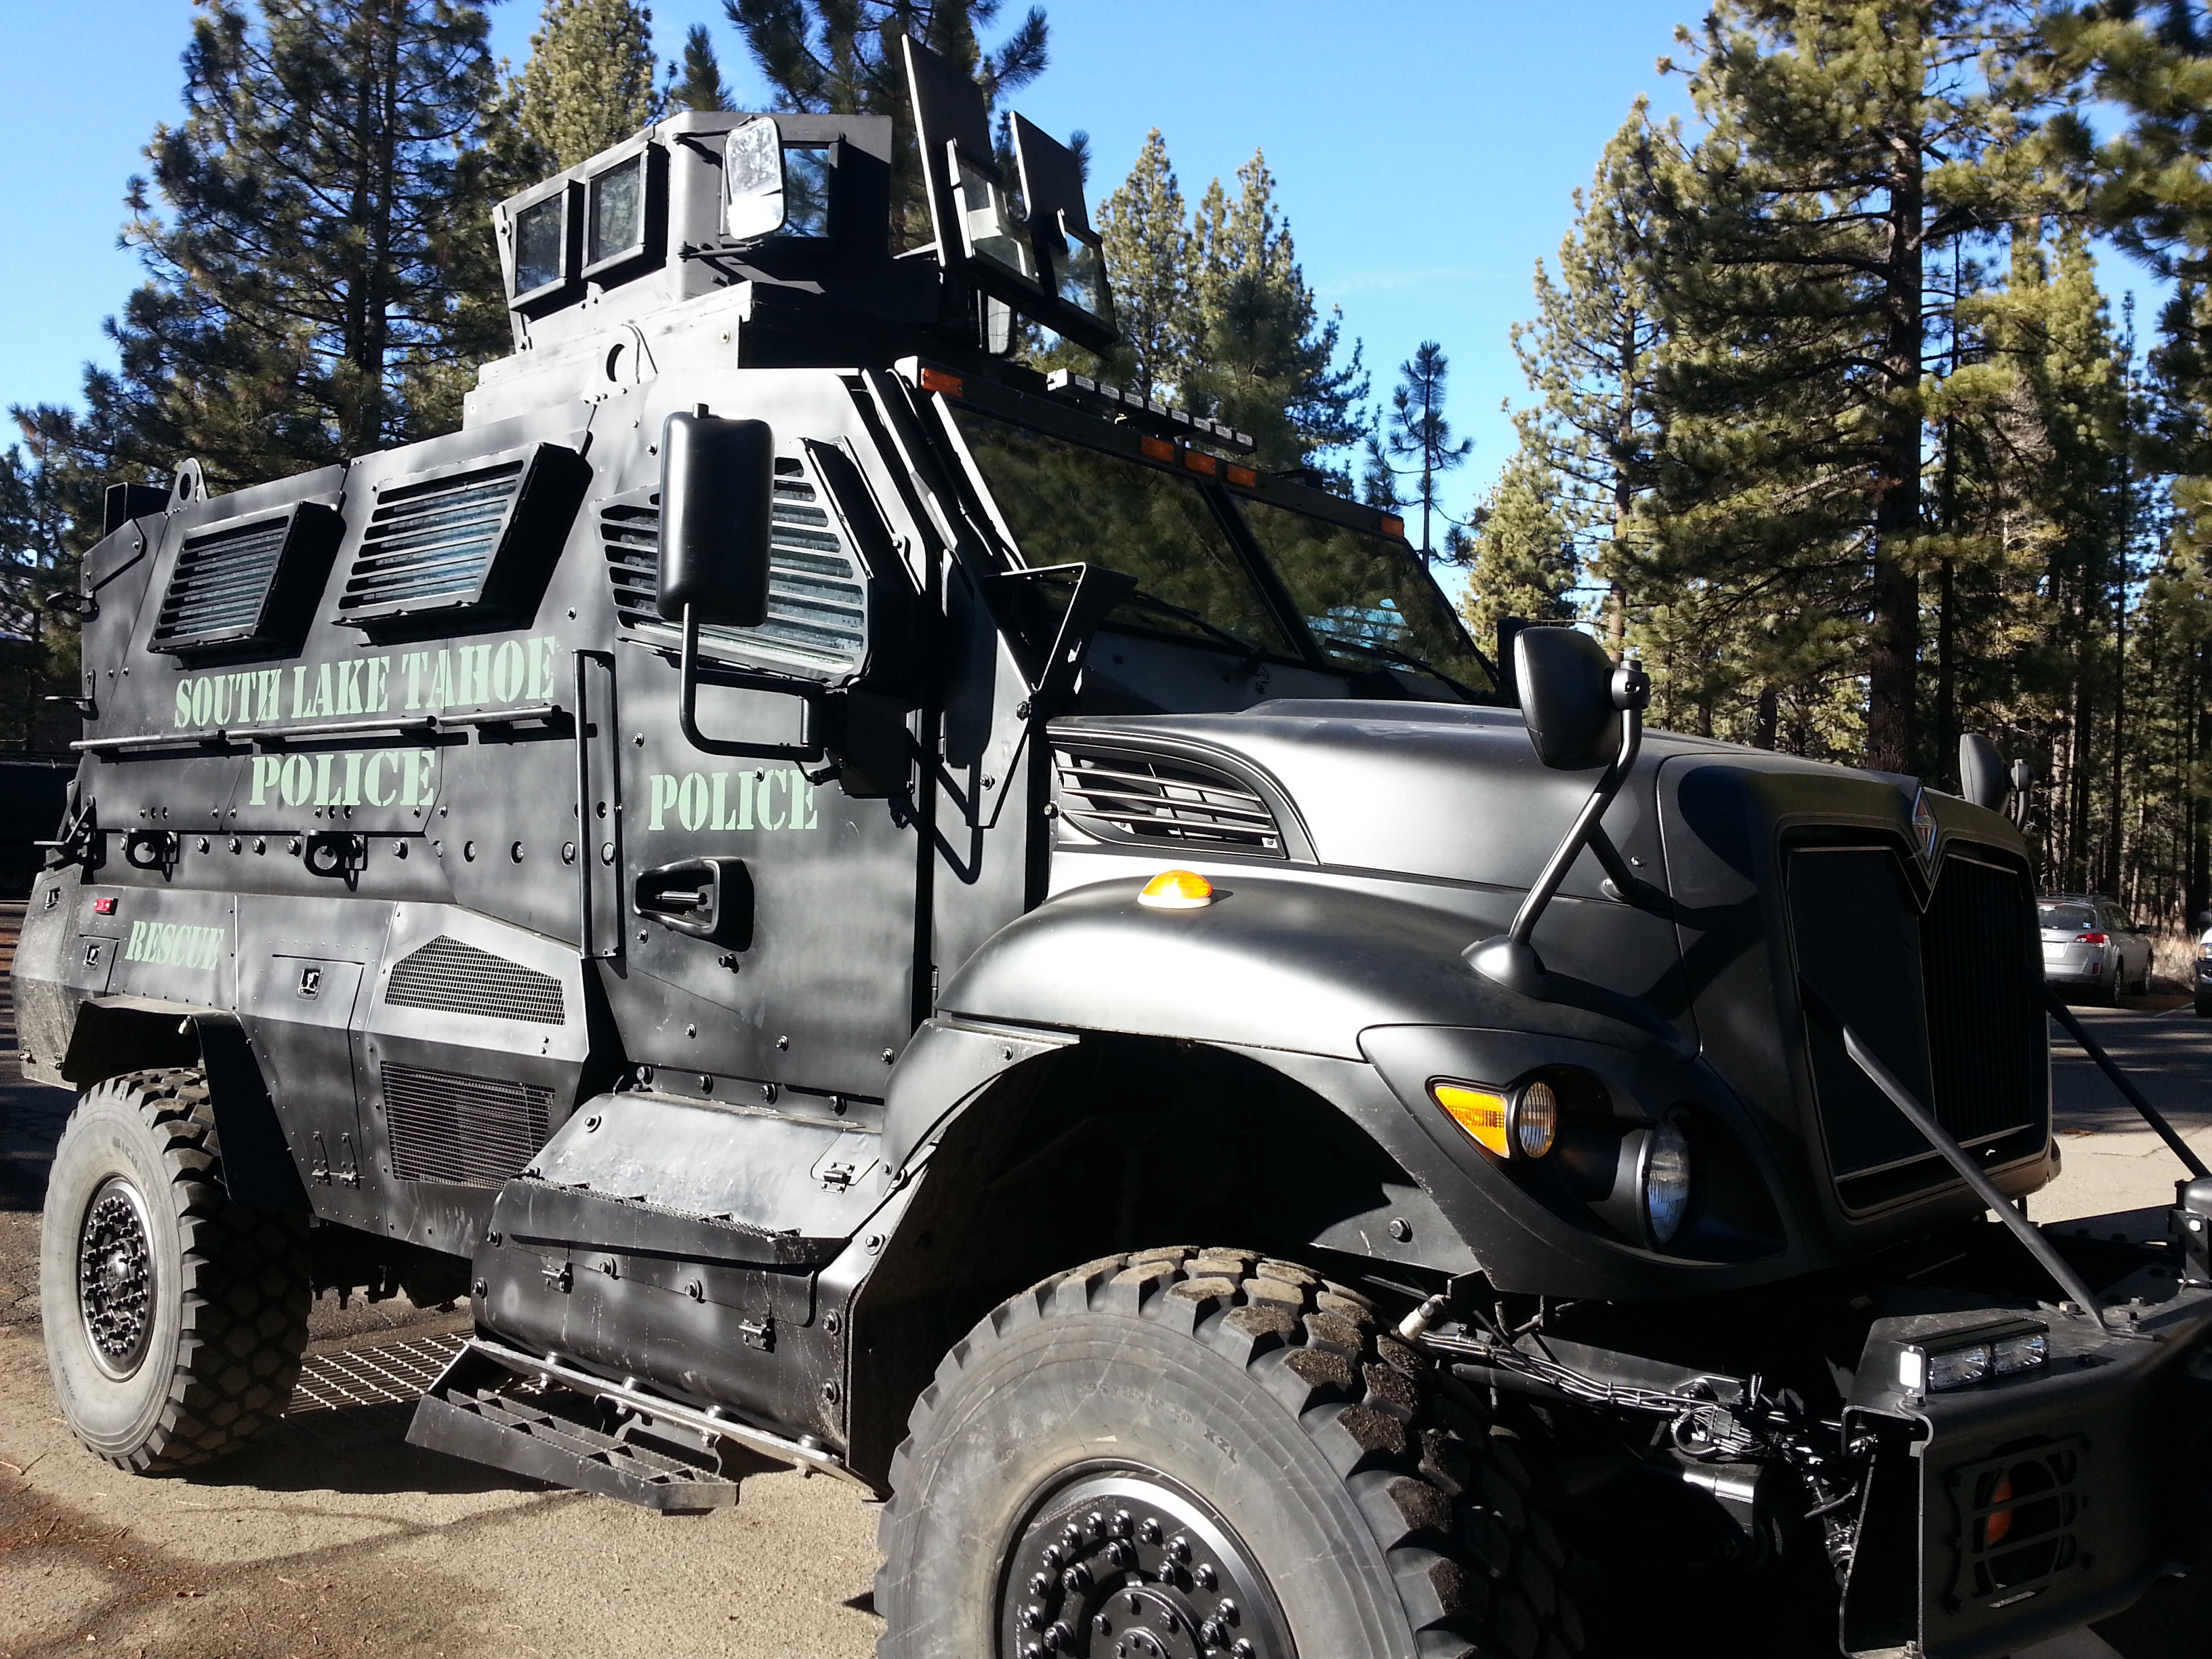 South Lake Tahoe Police Receives SWAT Vehicle From